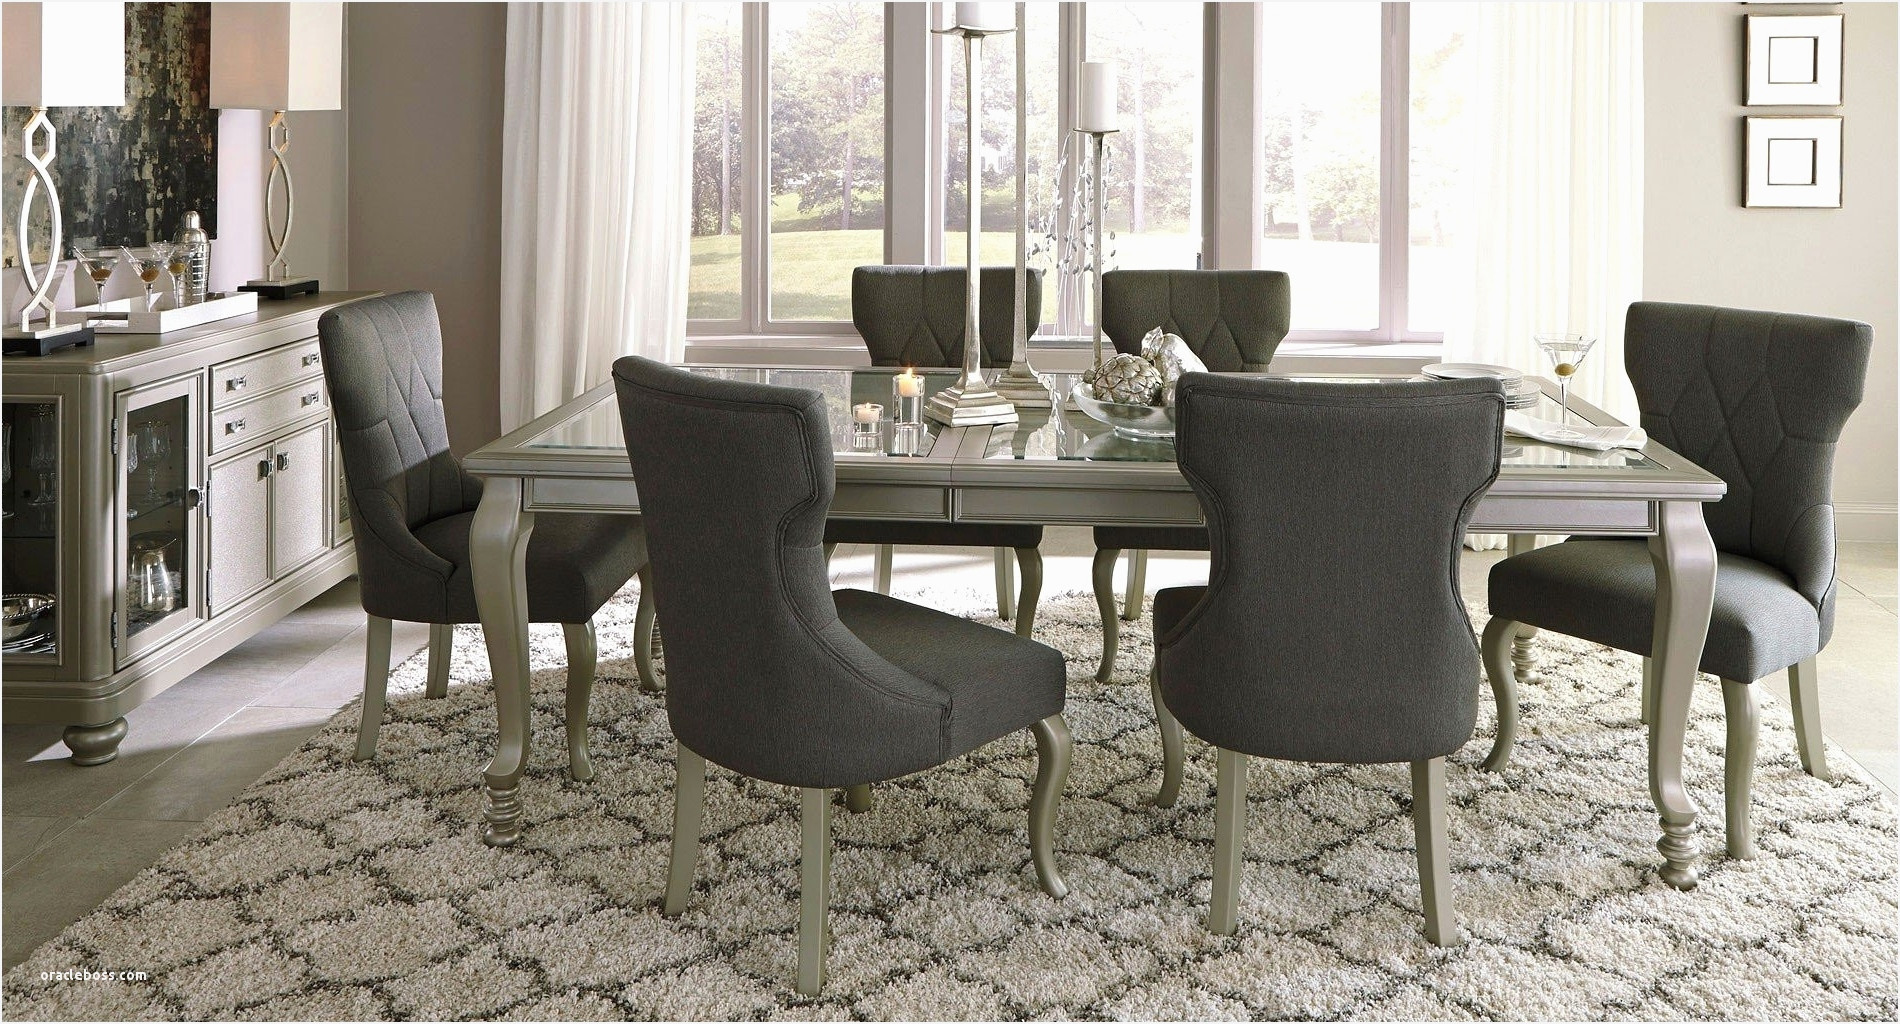 17 Ideal Chrome Floor Vase 2024 free download chrome floor vase of 34 unique cool chairs for your room pictures living room decor ideas throughout dining room tables elegant shaker chairs 0d archives modern house ideas and furniture set